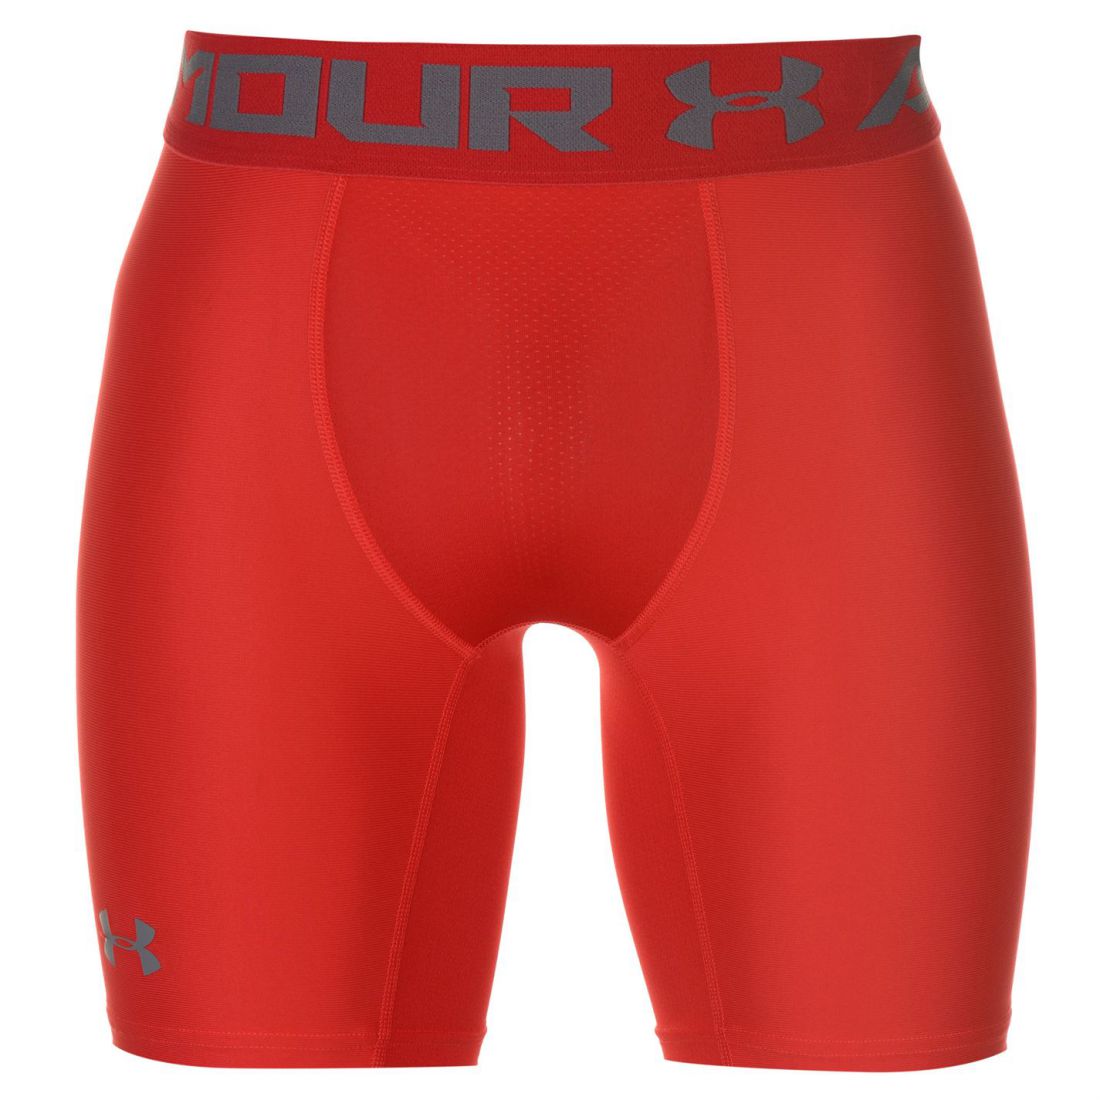 Under Armour Mens Heat Gear Core 6 Inch Shorts Base Layer Bottoms | eBay